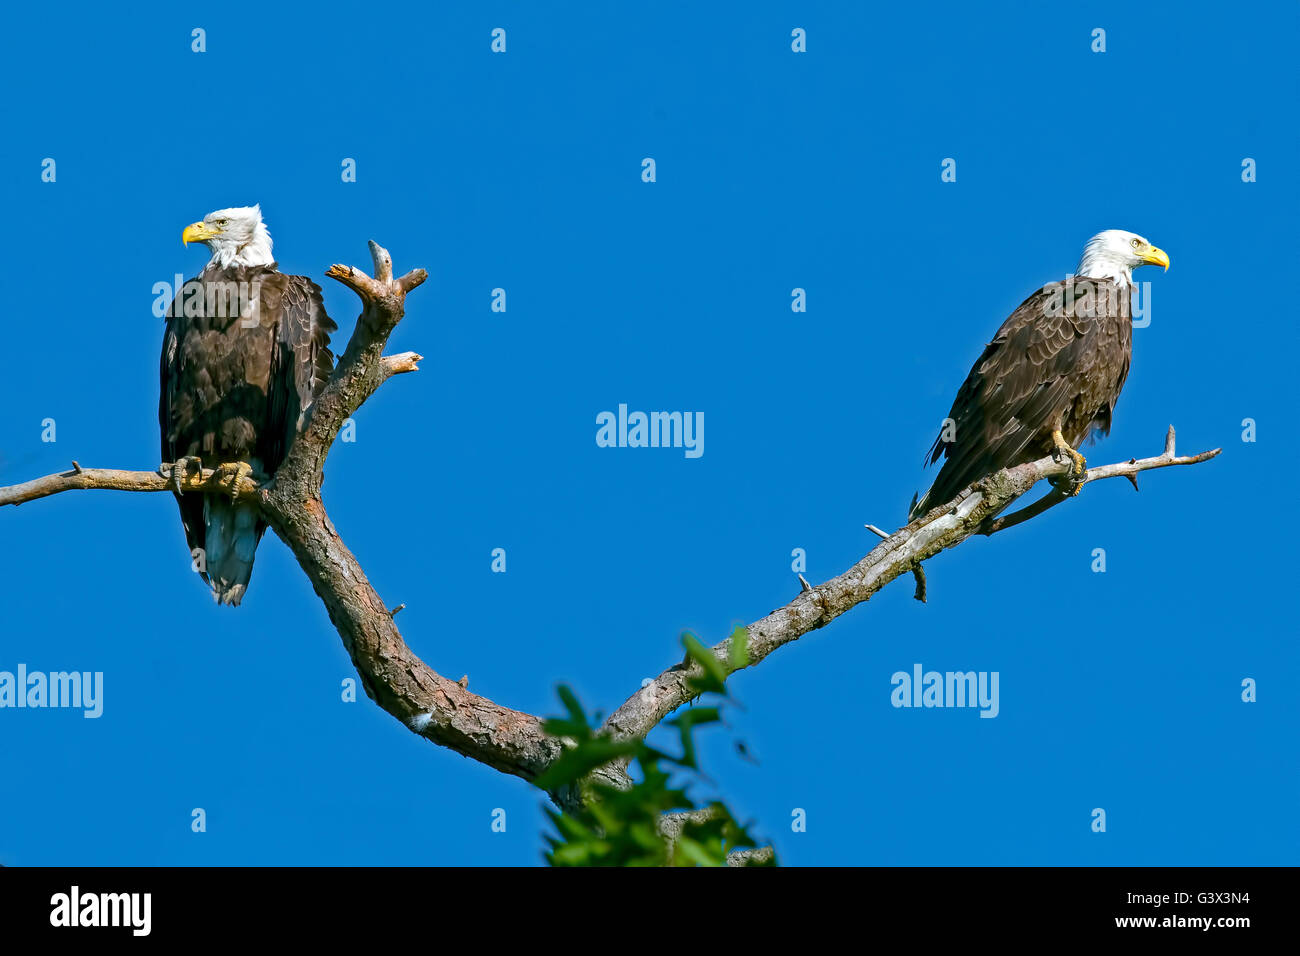 Pair of Bald Eagles in tree Stock Photo